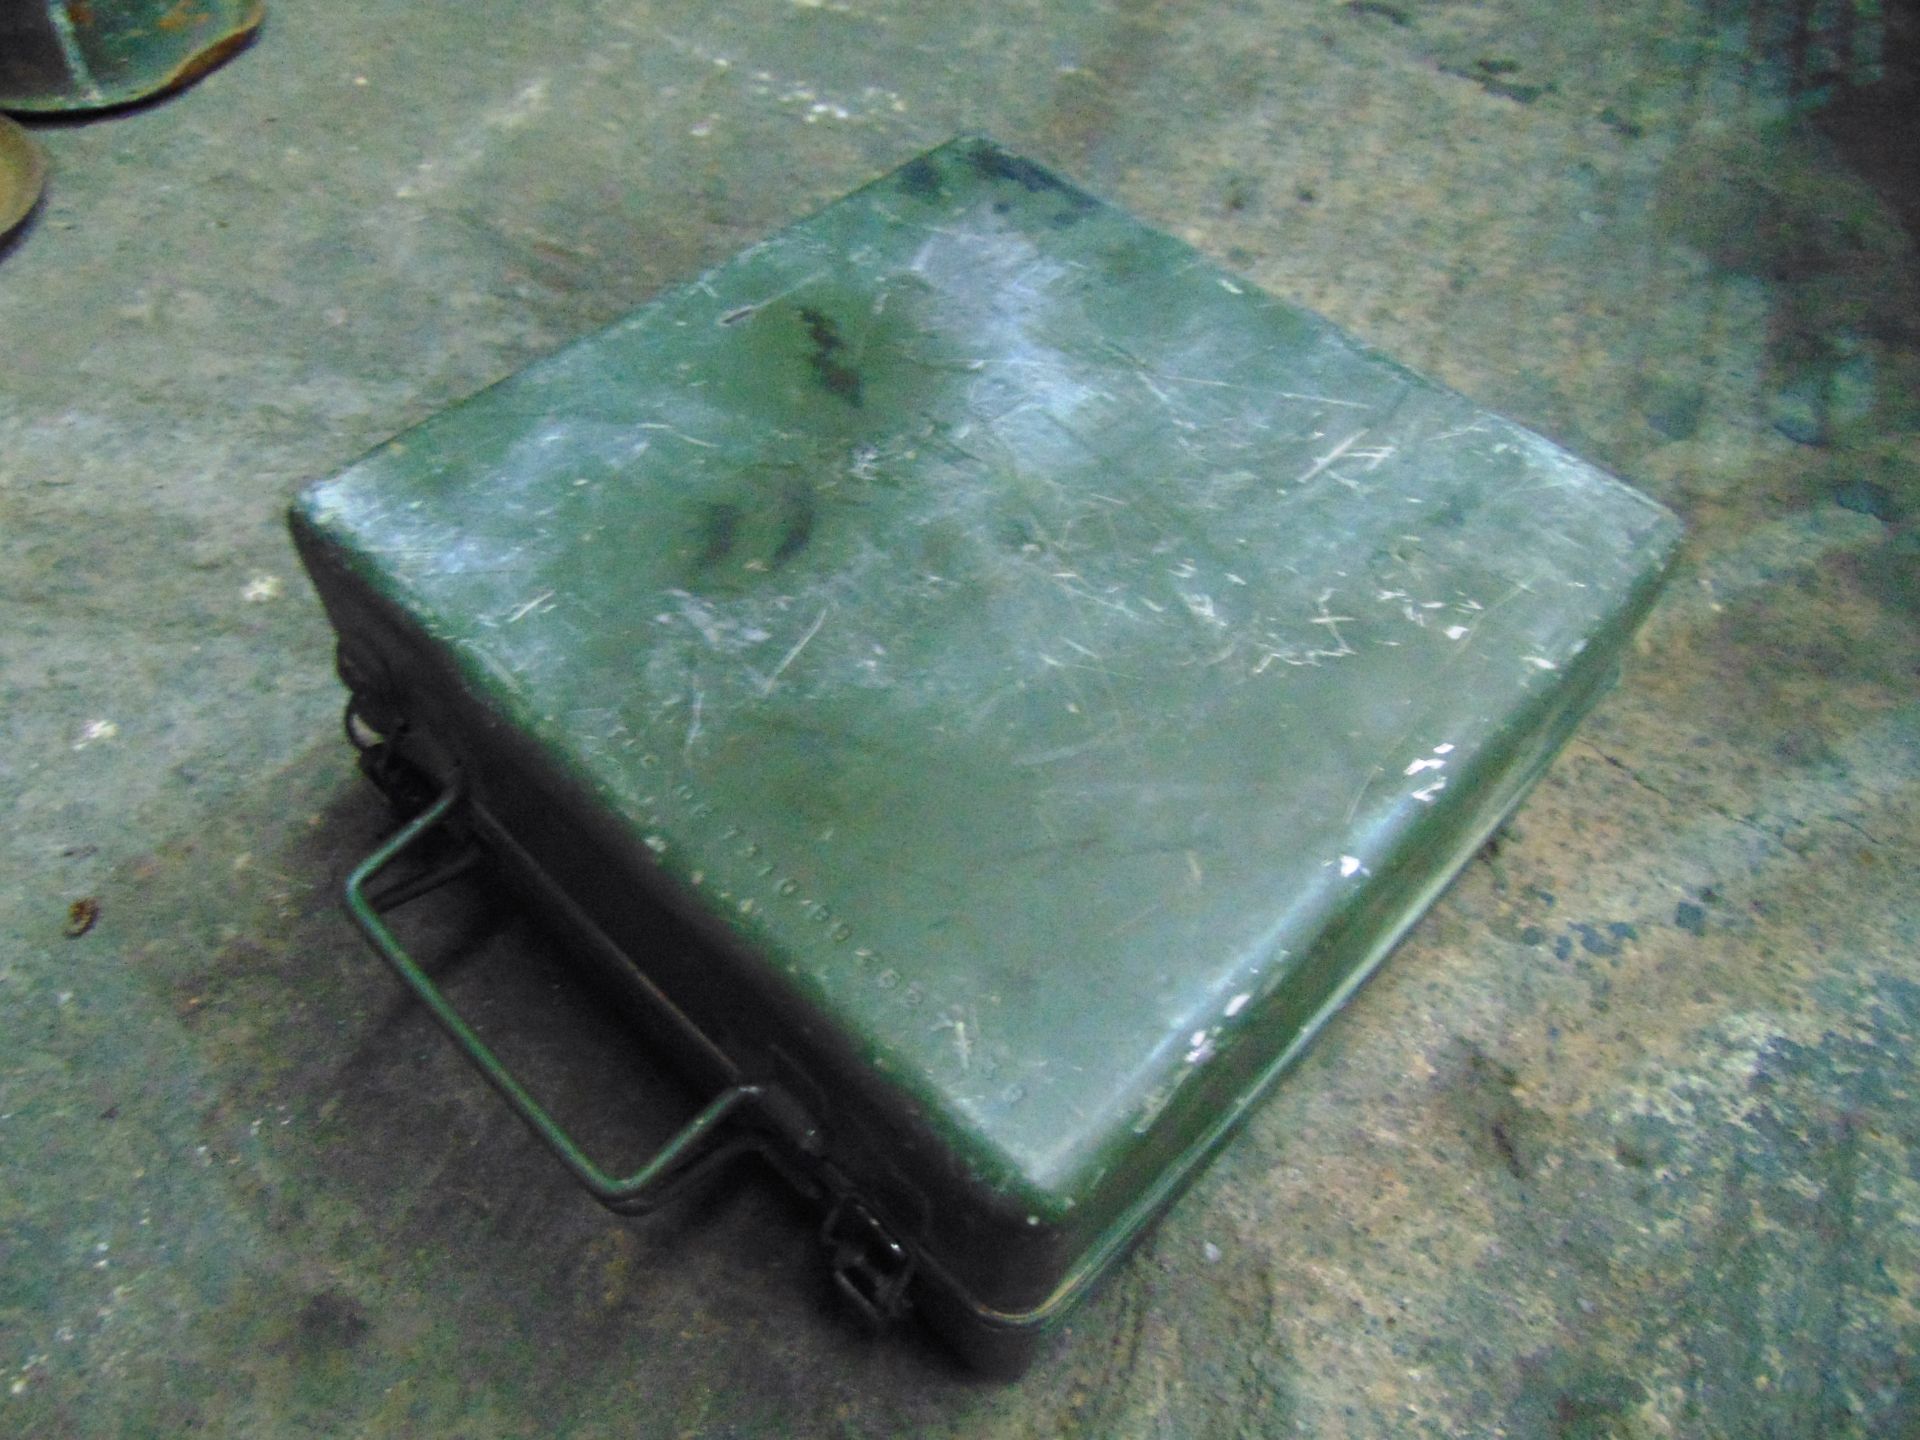 No. 12 Diesel Cooker/Camping Stove - Image 5 of 5